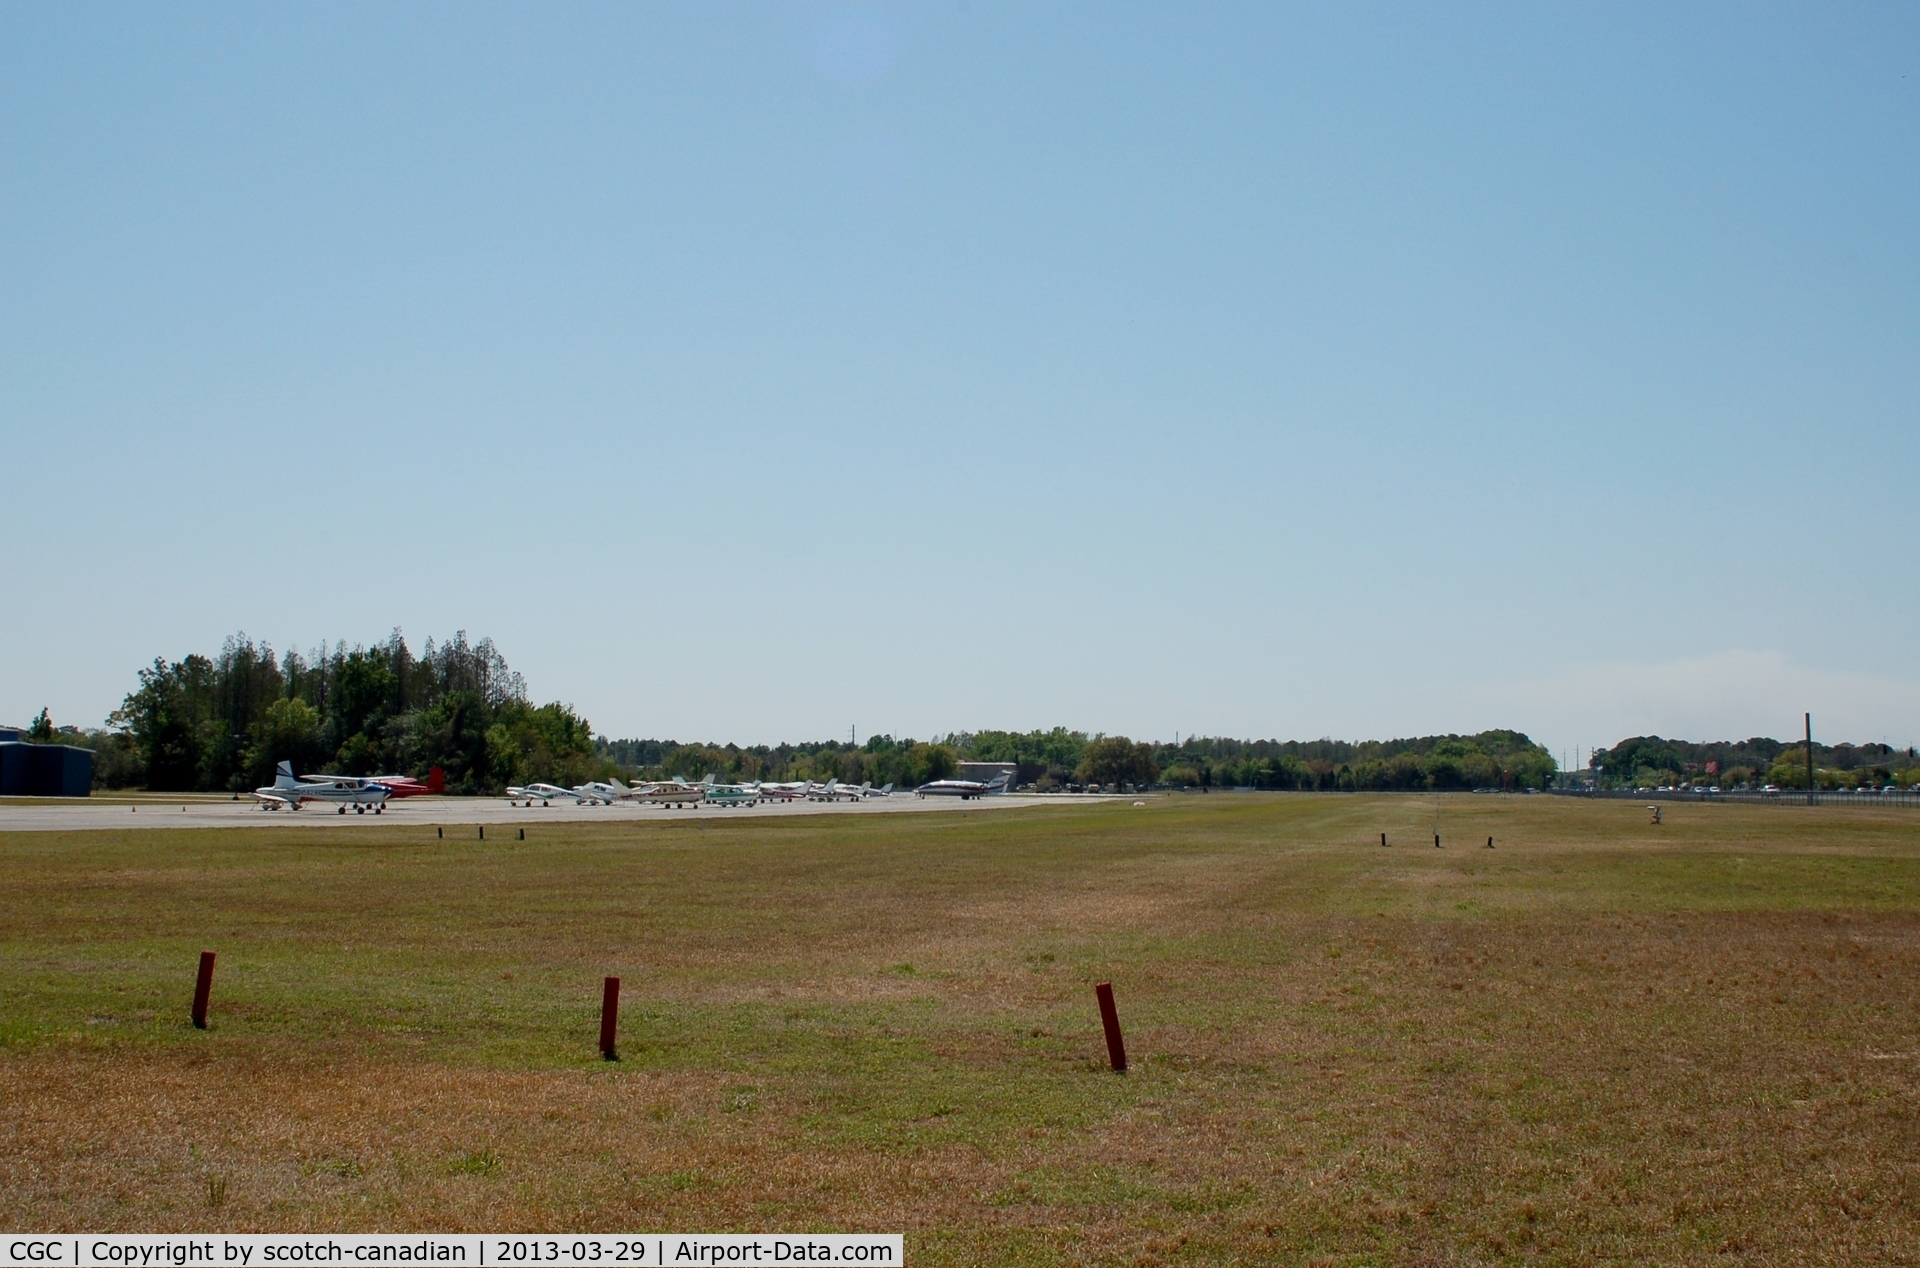 Crystal River Airport (CGC) - Approach end of Runway 18 at Crystal River Airport, Crystal River, FL